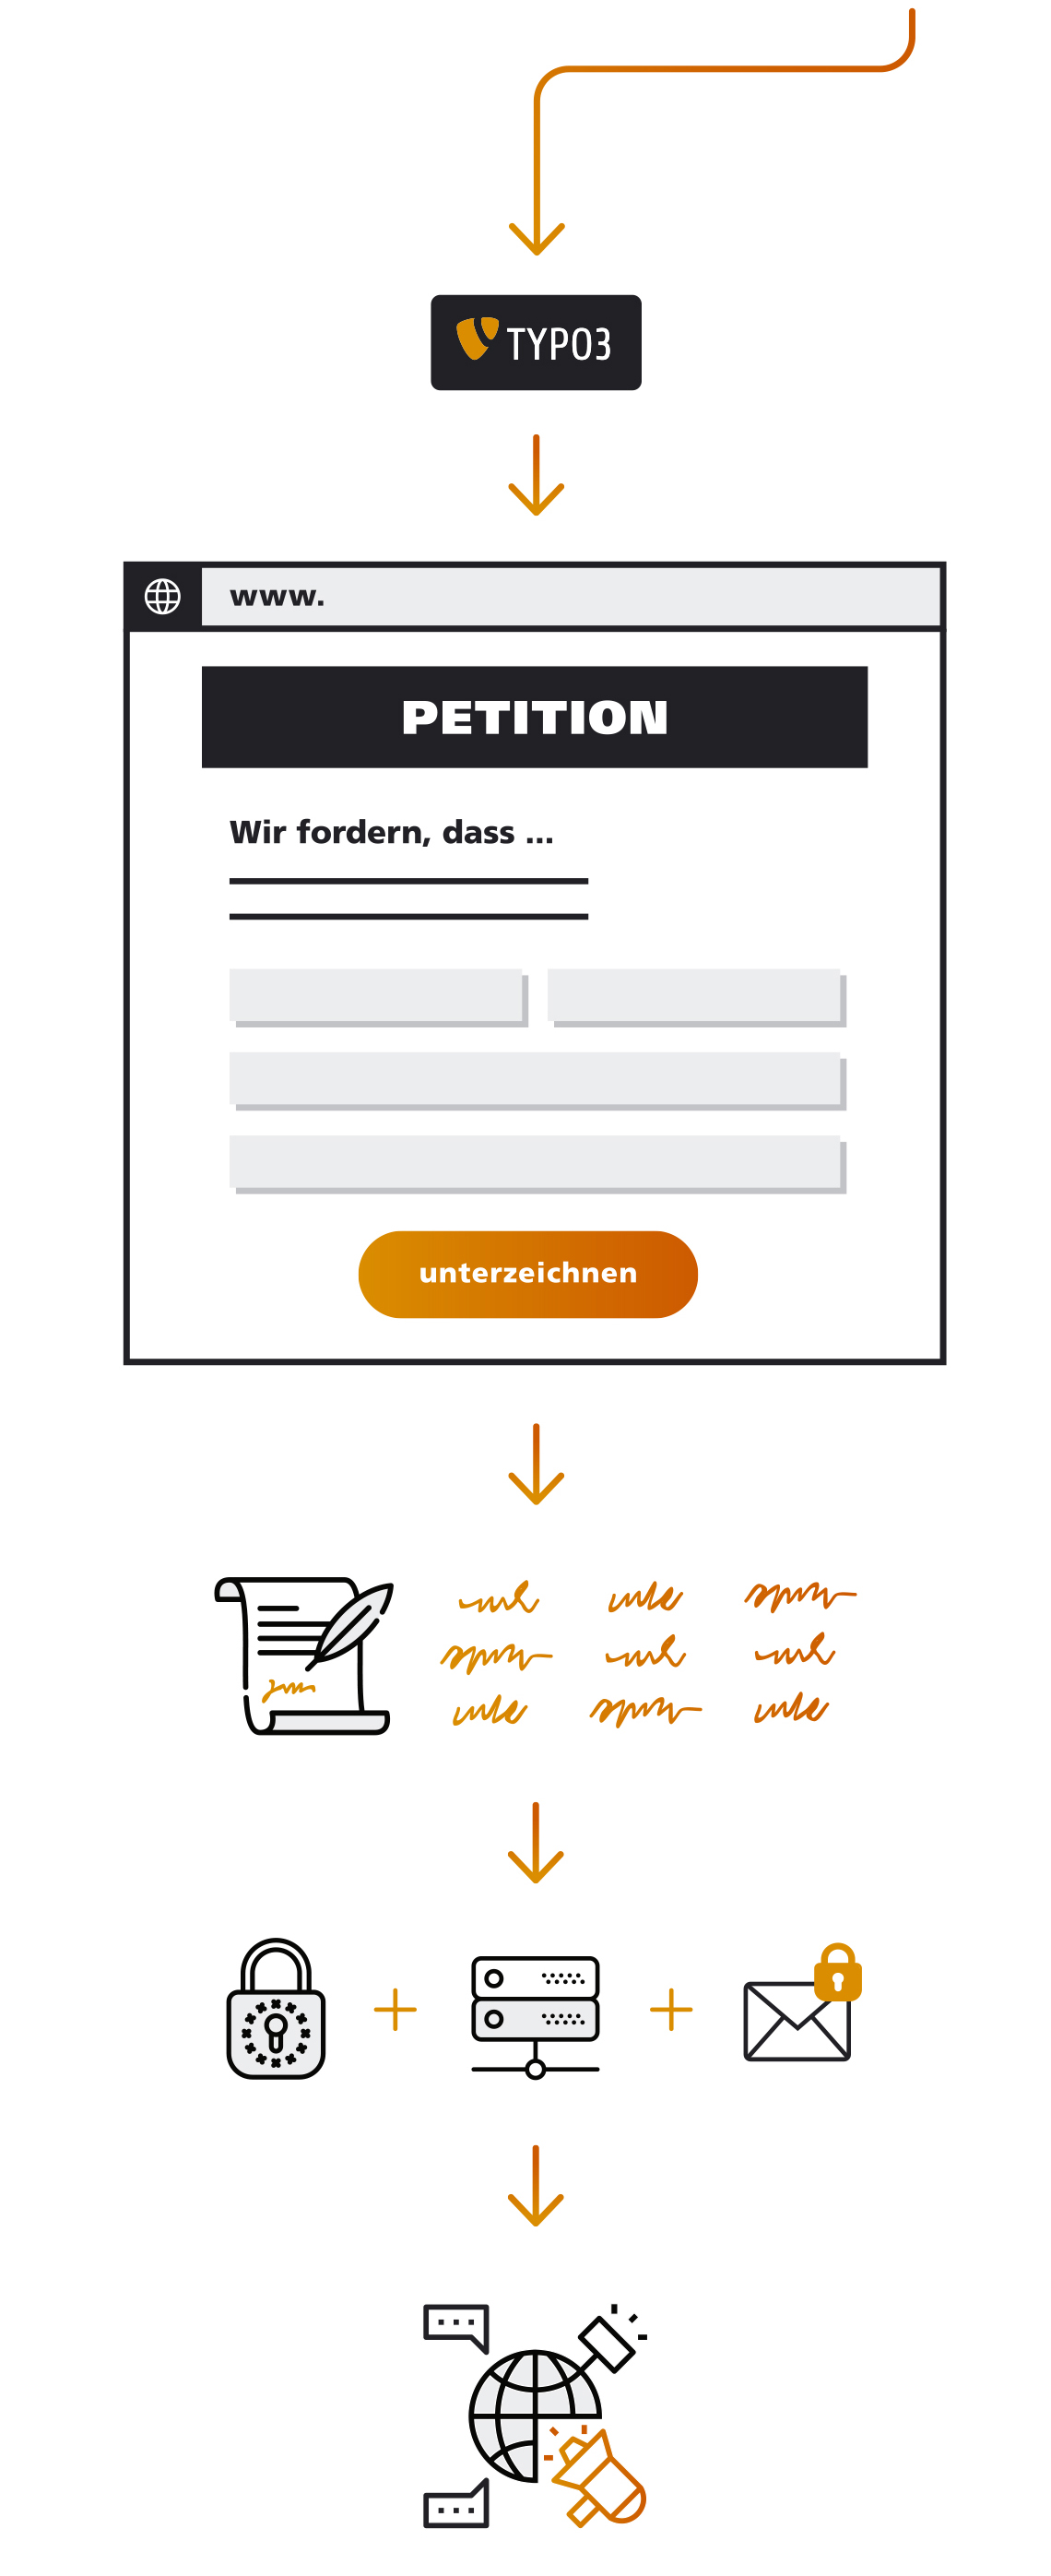 Typo3 Entwicklung, Petition